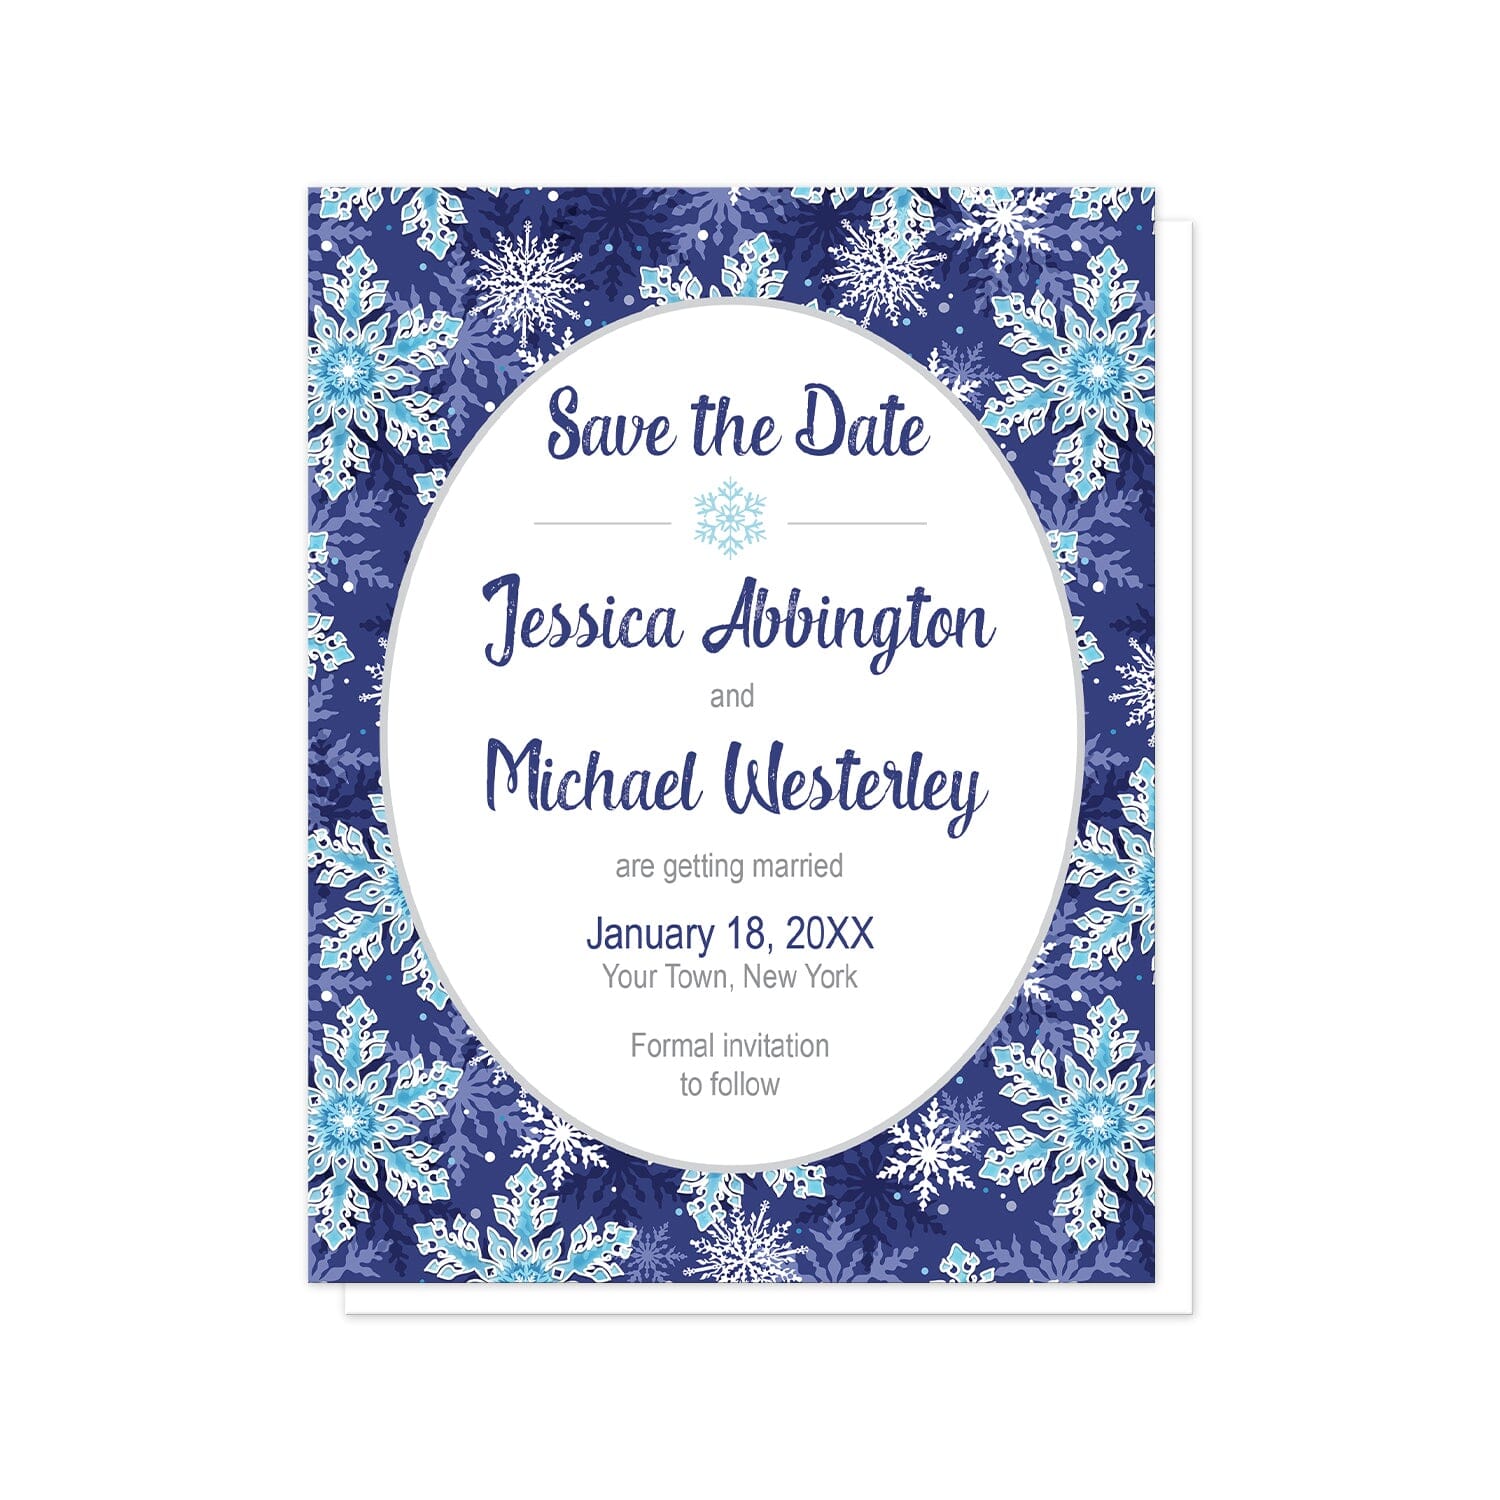 Navy Blue Snowflake Save the Date Cards at Artistically Invited. Beautifully ornate navy blue snowflake save the date cards designed with your personalized wedding date announcement details custom printed in navy blue and gray in a white oval frame design over a navy blue, aqua, and white snowflake pattern background.